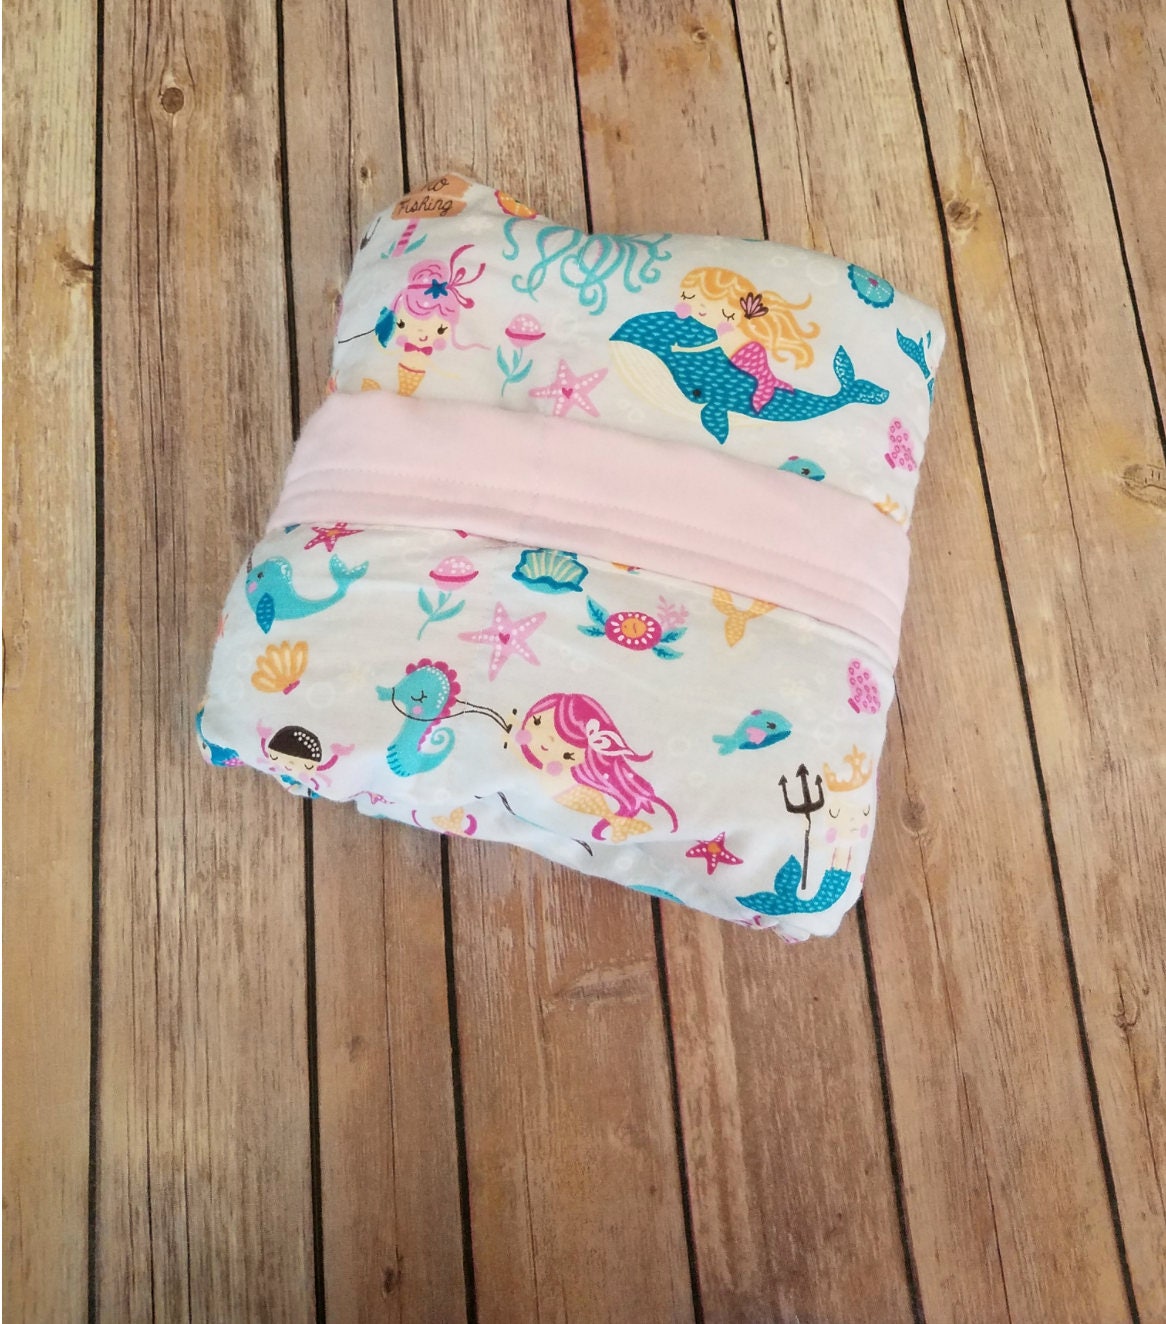 Mermaid, 5 Pound, WEIGHTED BLANKET, Ready To Ship, 5 pounds, 28x32, for